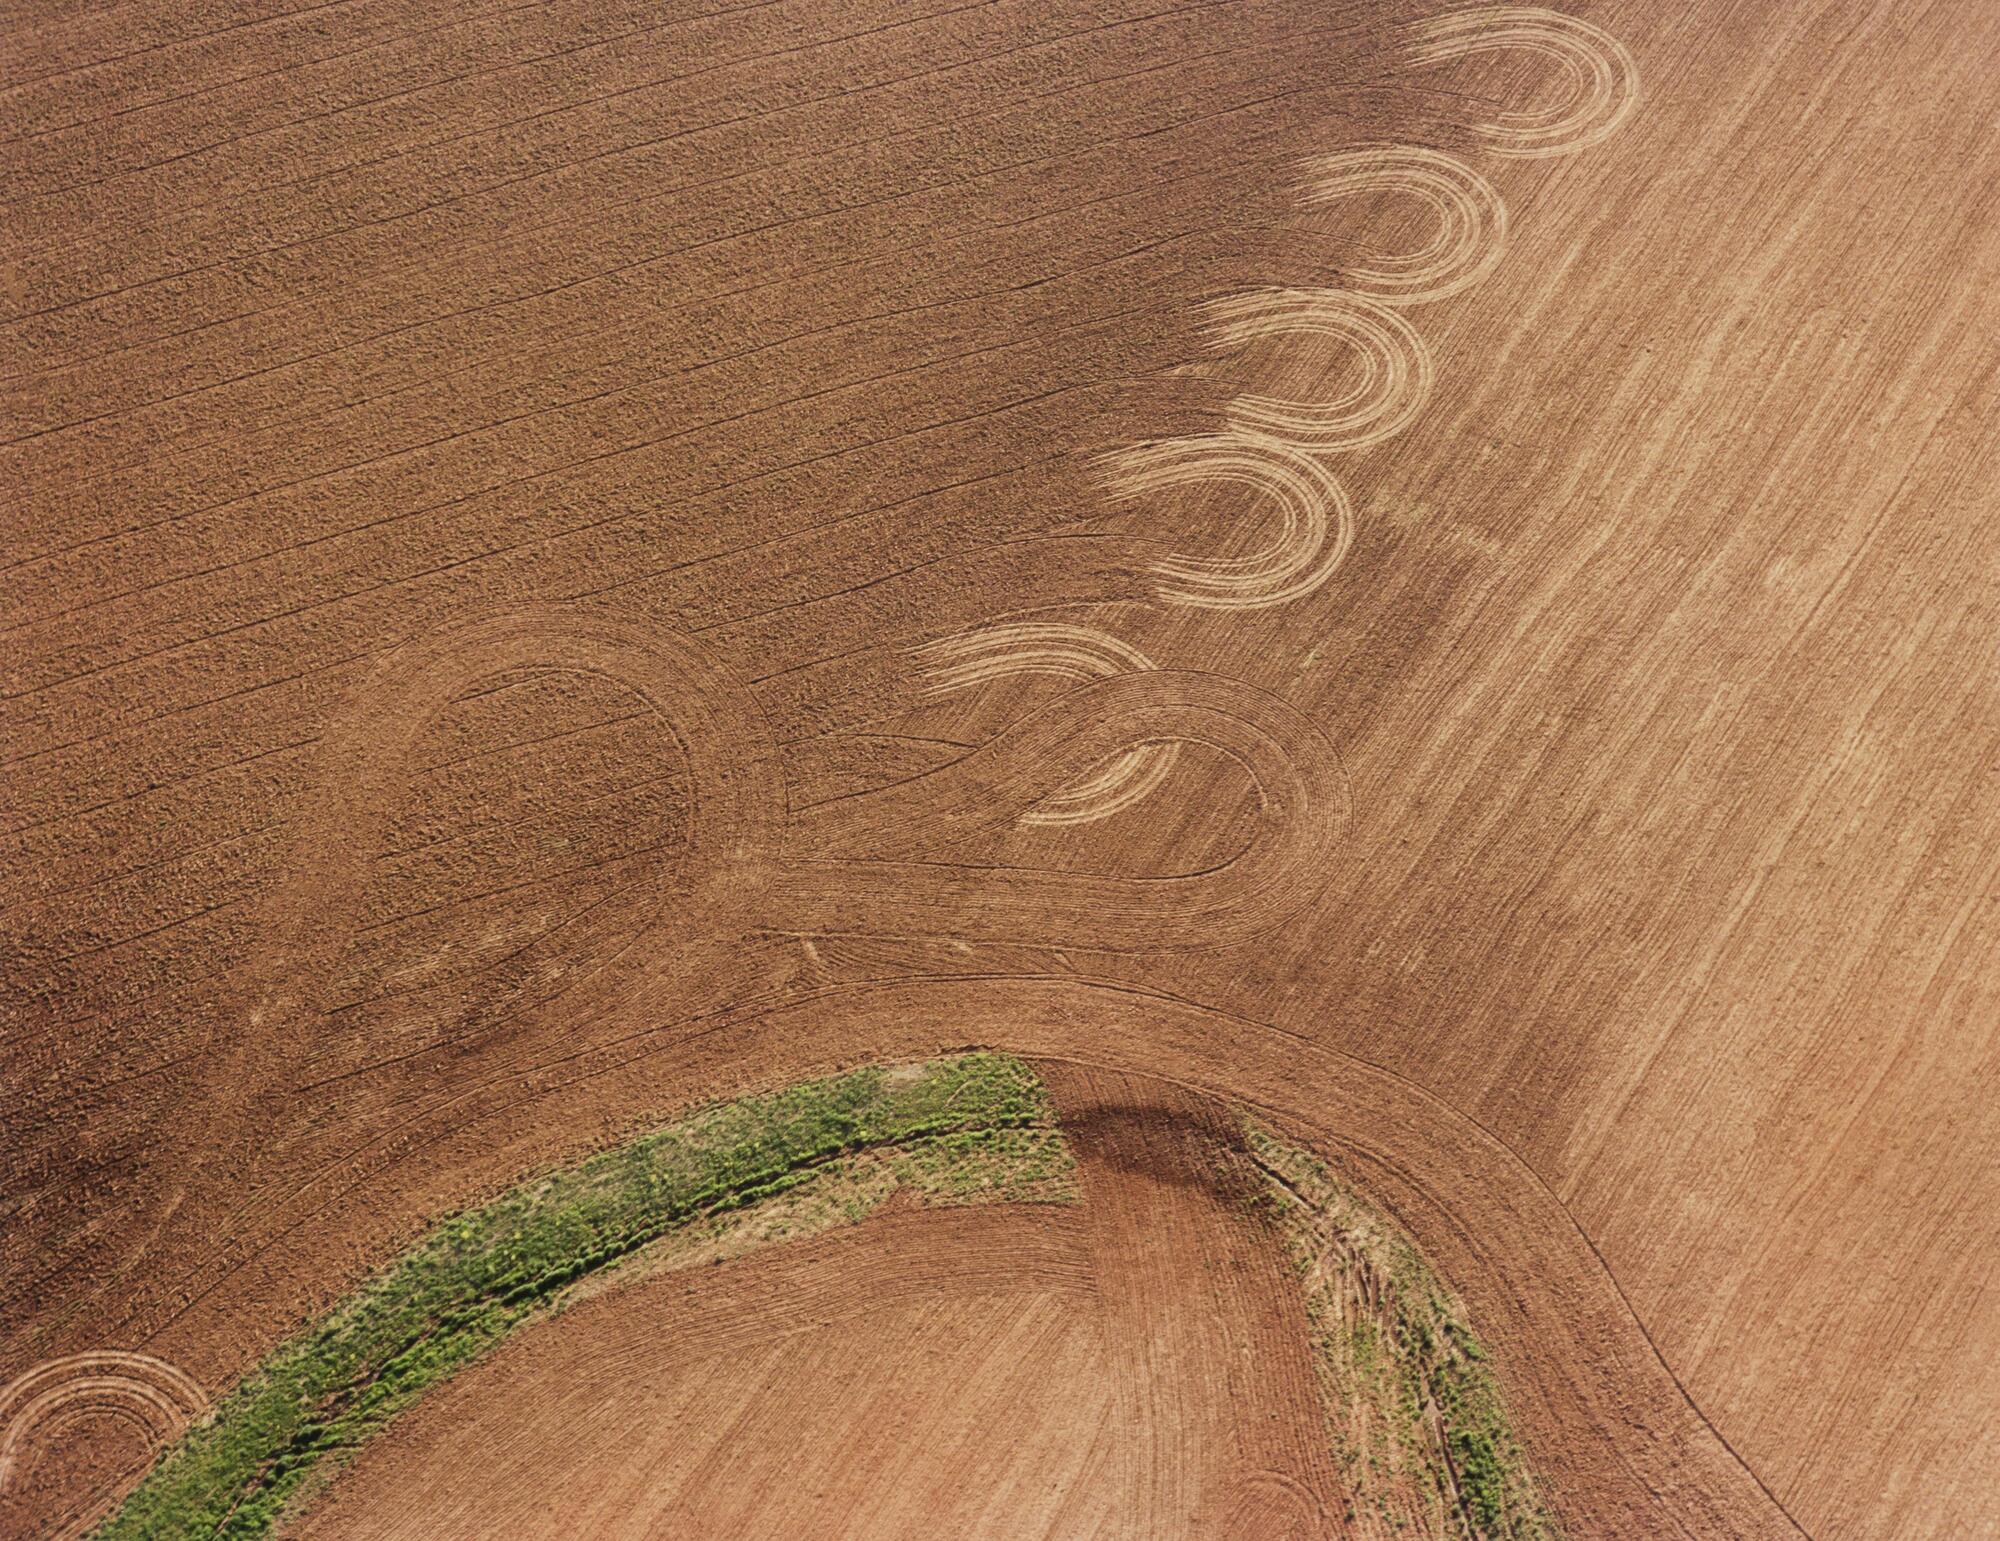 <br />
Print of an aerial view of plowed fields with U-shaped designs left by the machinery. A green swath cuts through the bottom fo the picture in another U-shape.